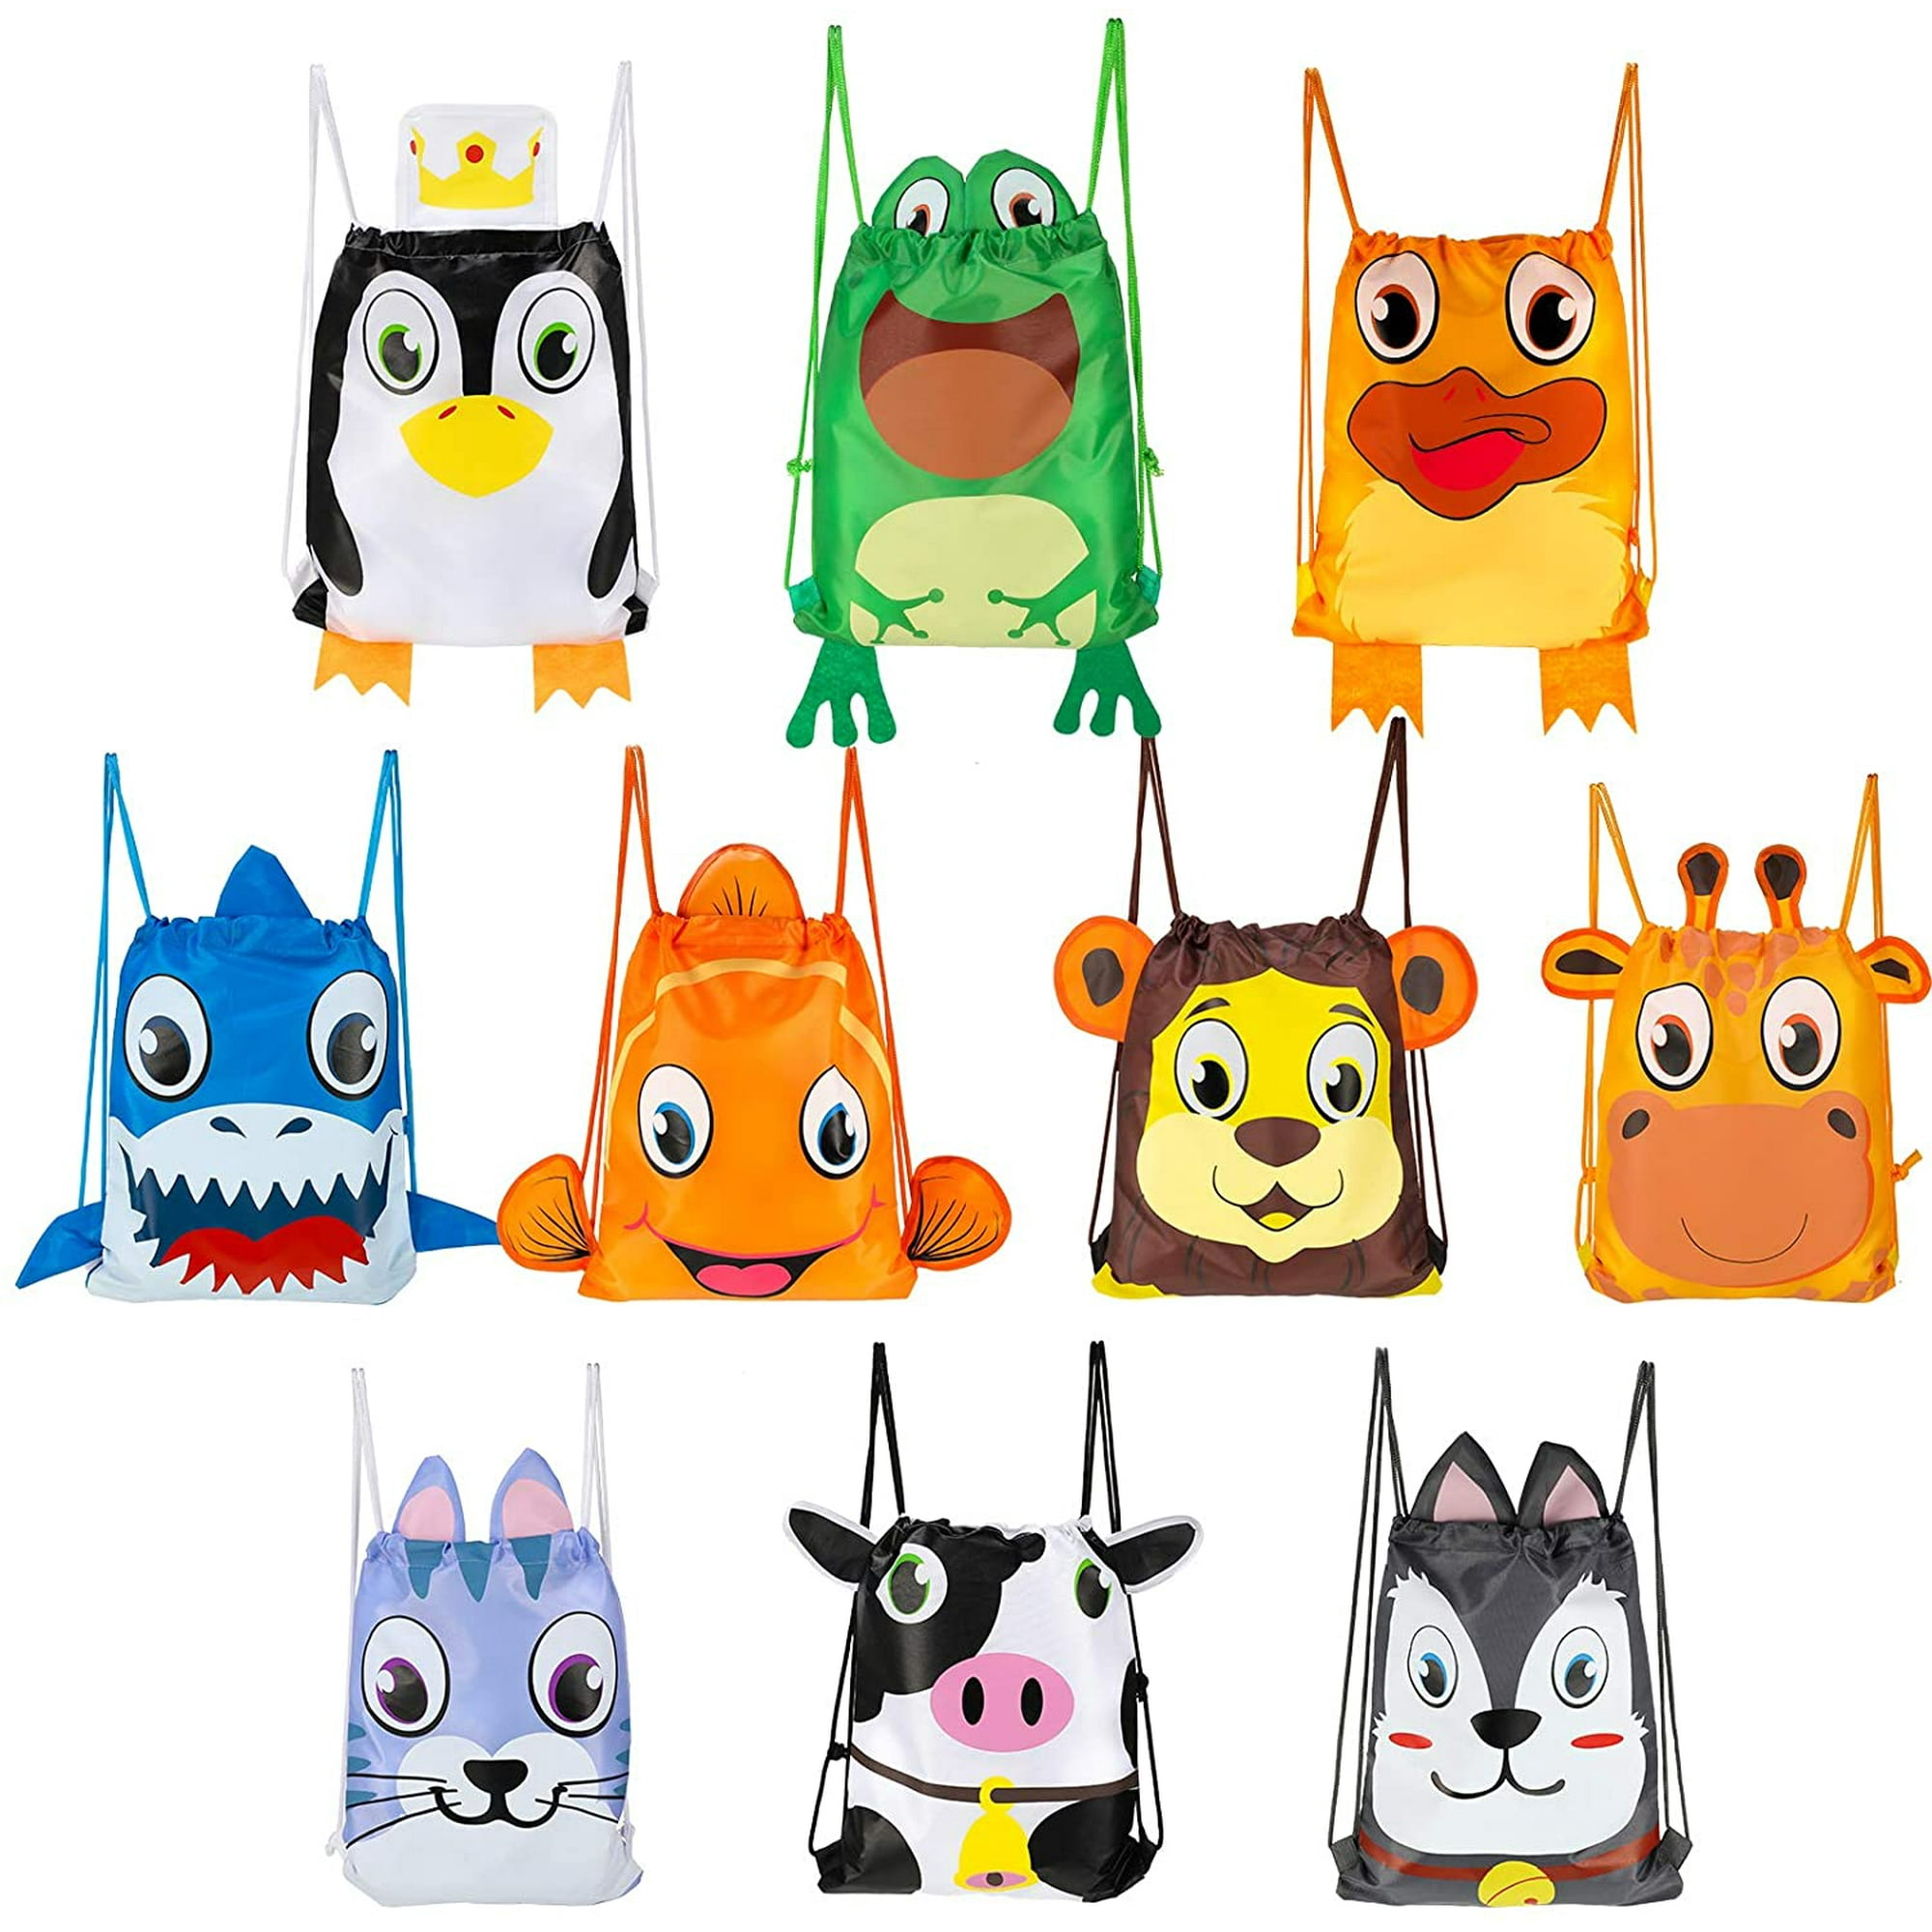 10 Pieces Cartoon Animal Drawstring Bags Cute Ear and Tail Drawstring Goody  Party Favor Bags for Birthday Candy Goodie Treat Bags Giraffe/ Lion /Cow  /Duck /Cat /Shark /Fish /Puppy Dog | Walmart Canada